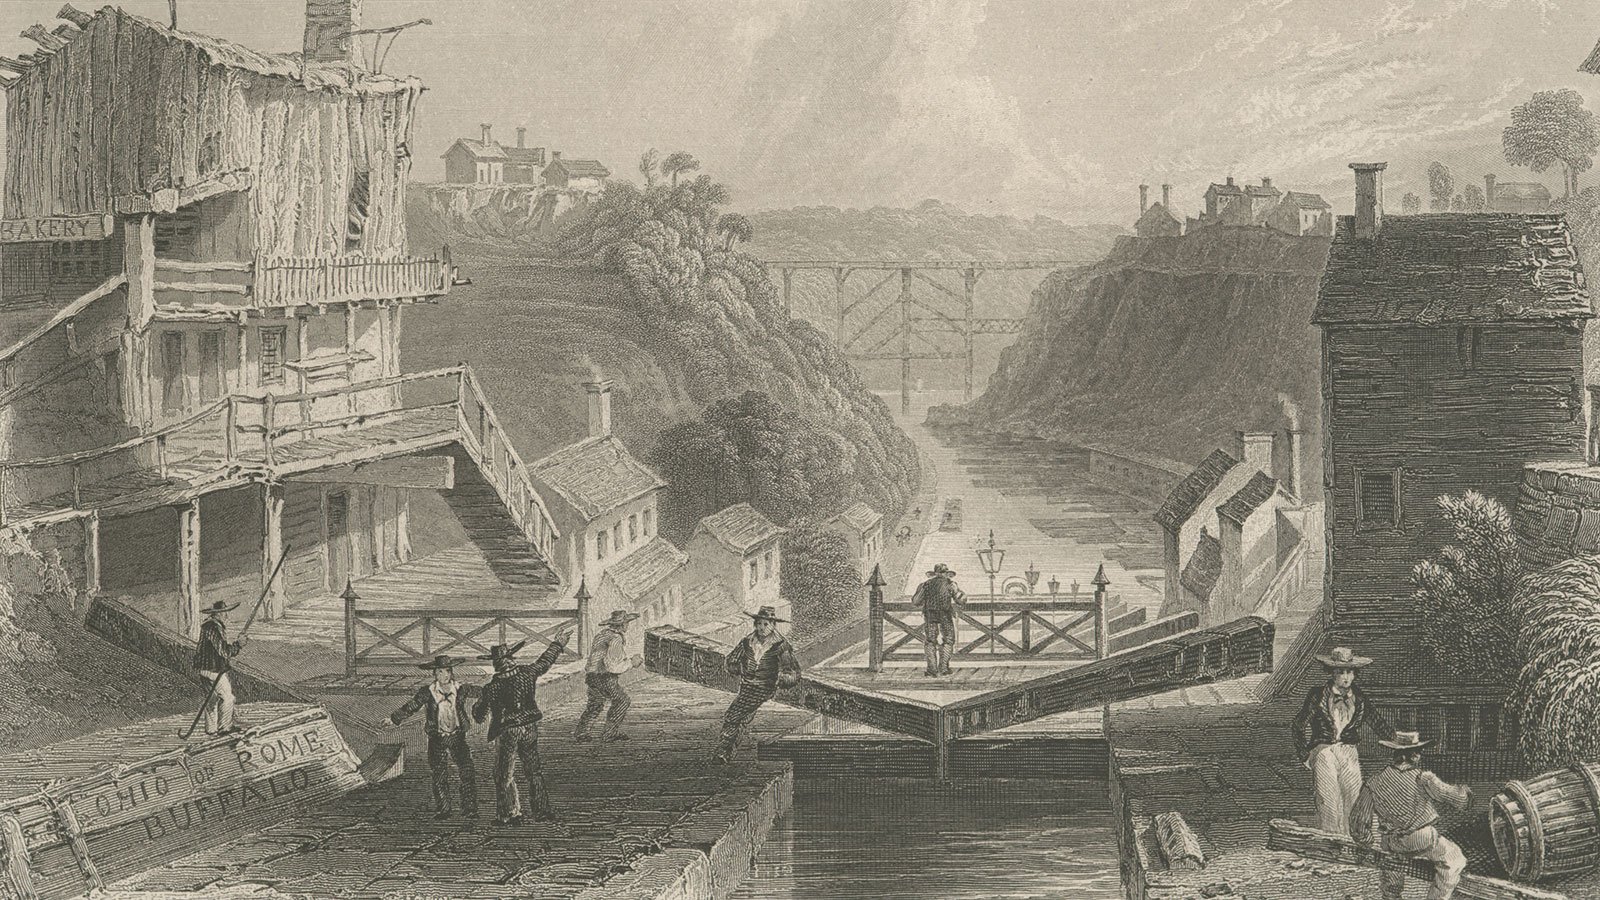 Lockport, Erie Canal drawing